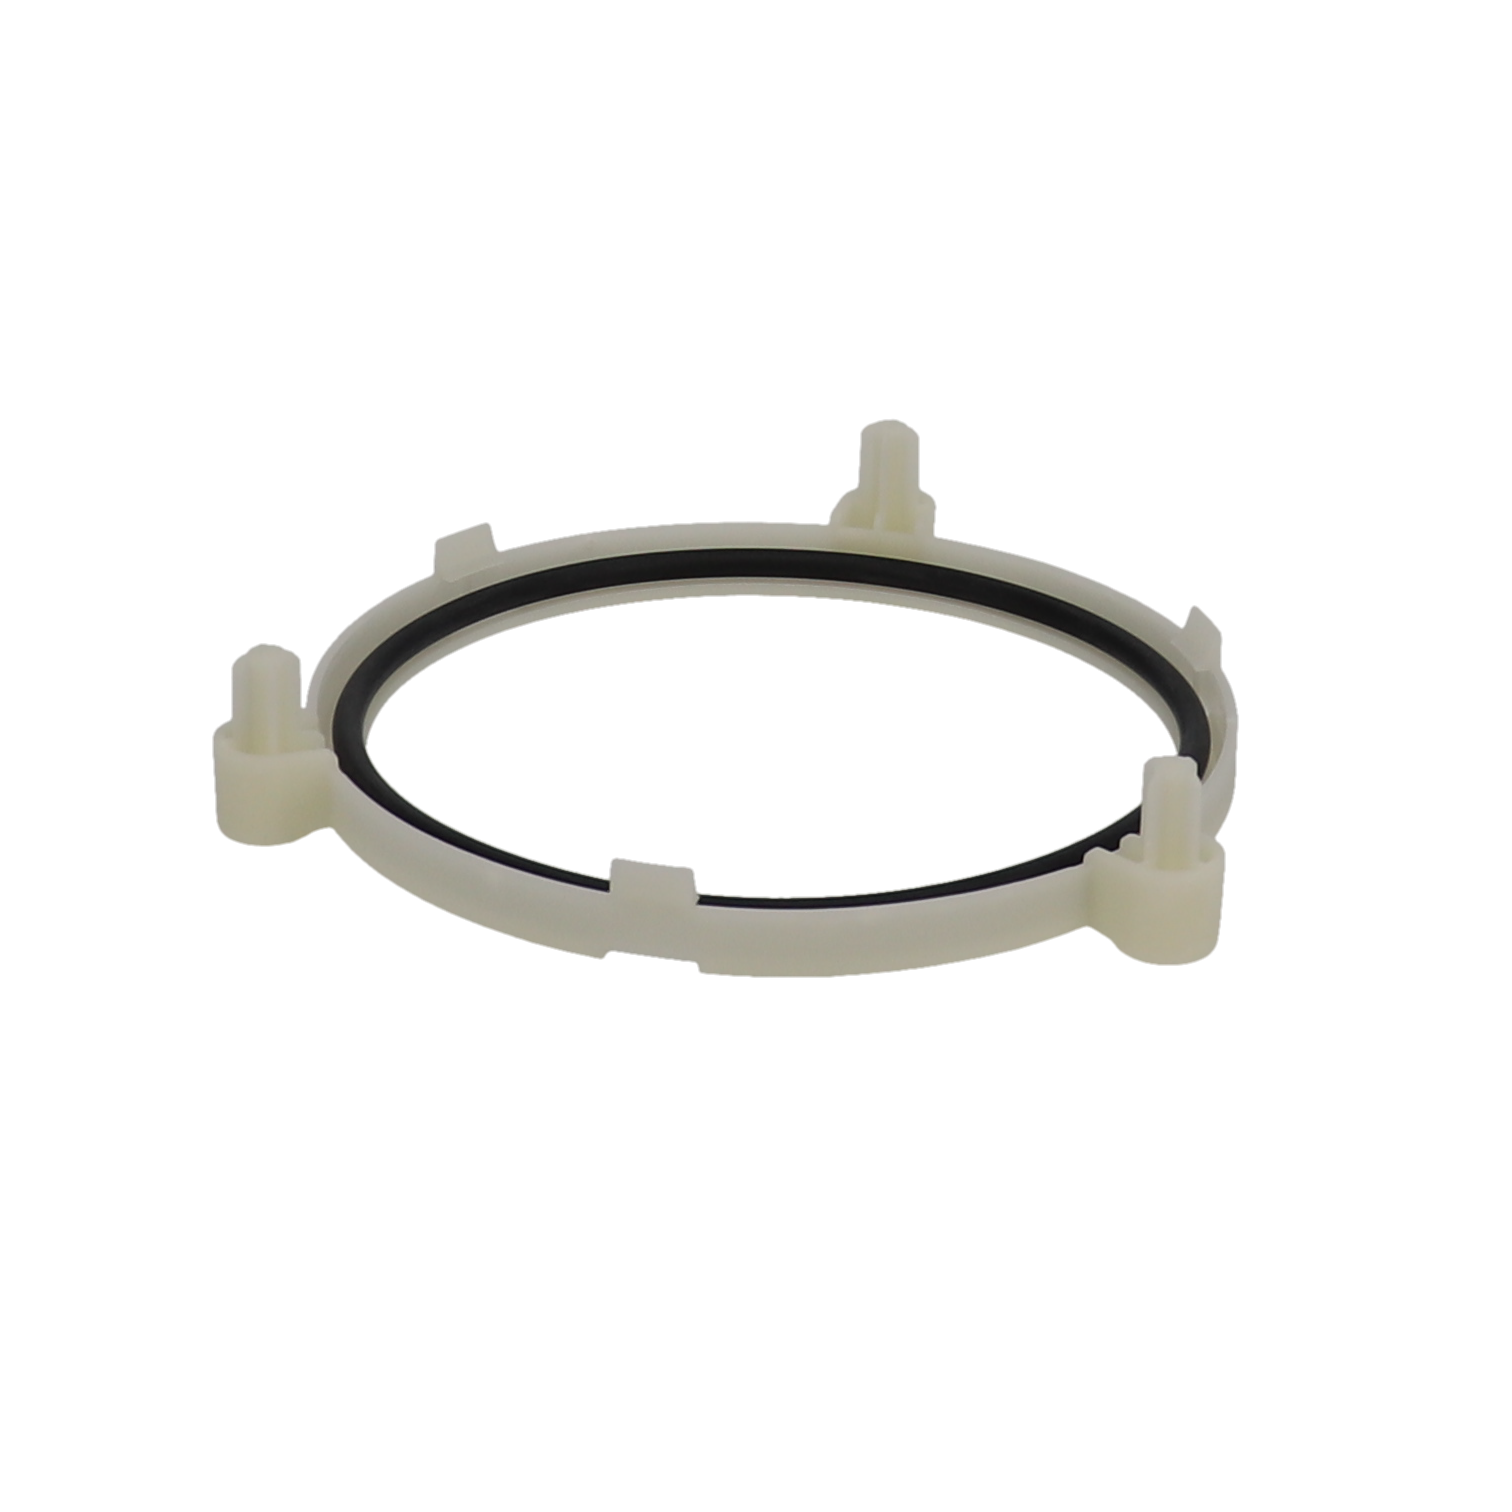 SP Snap Ring for Tank Base, RS